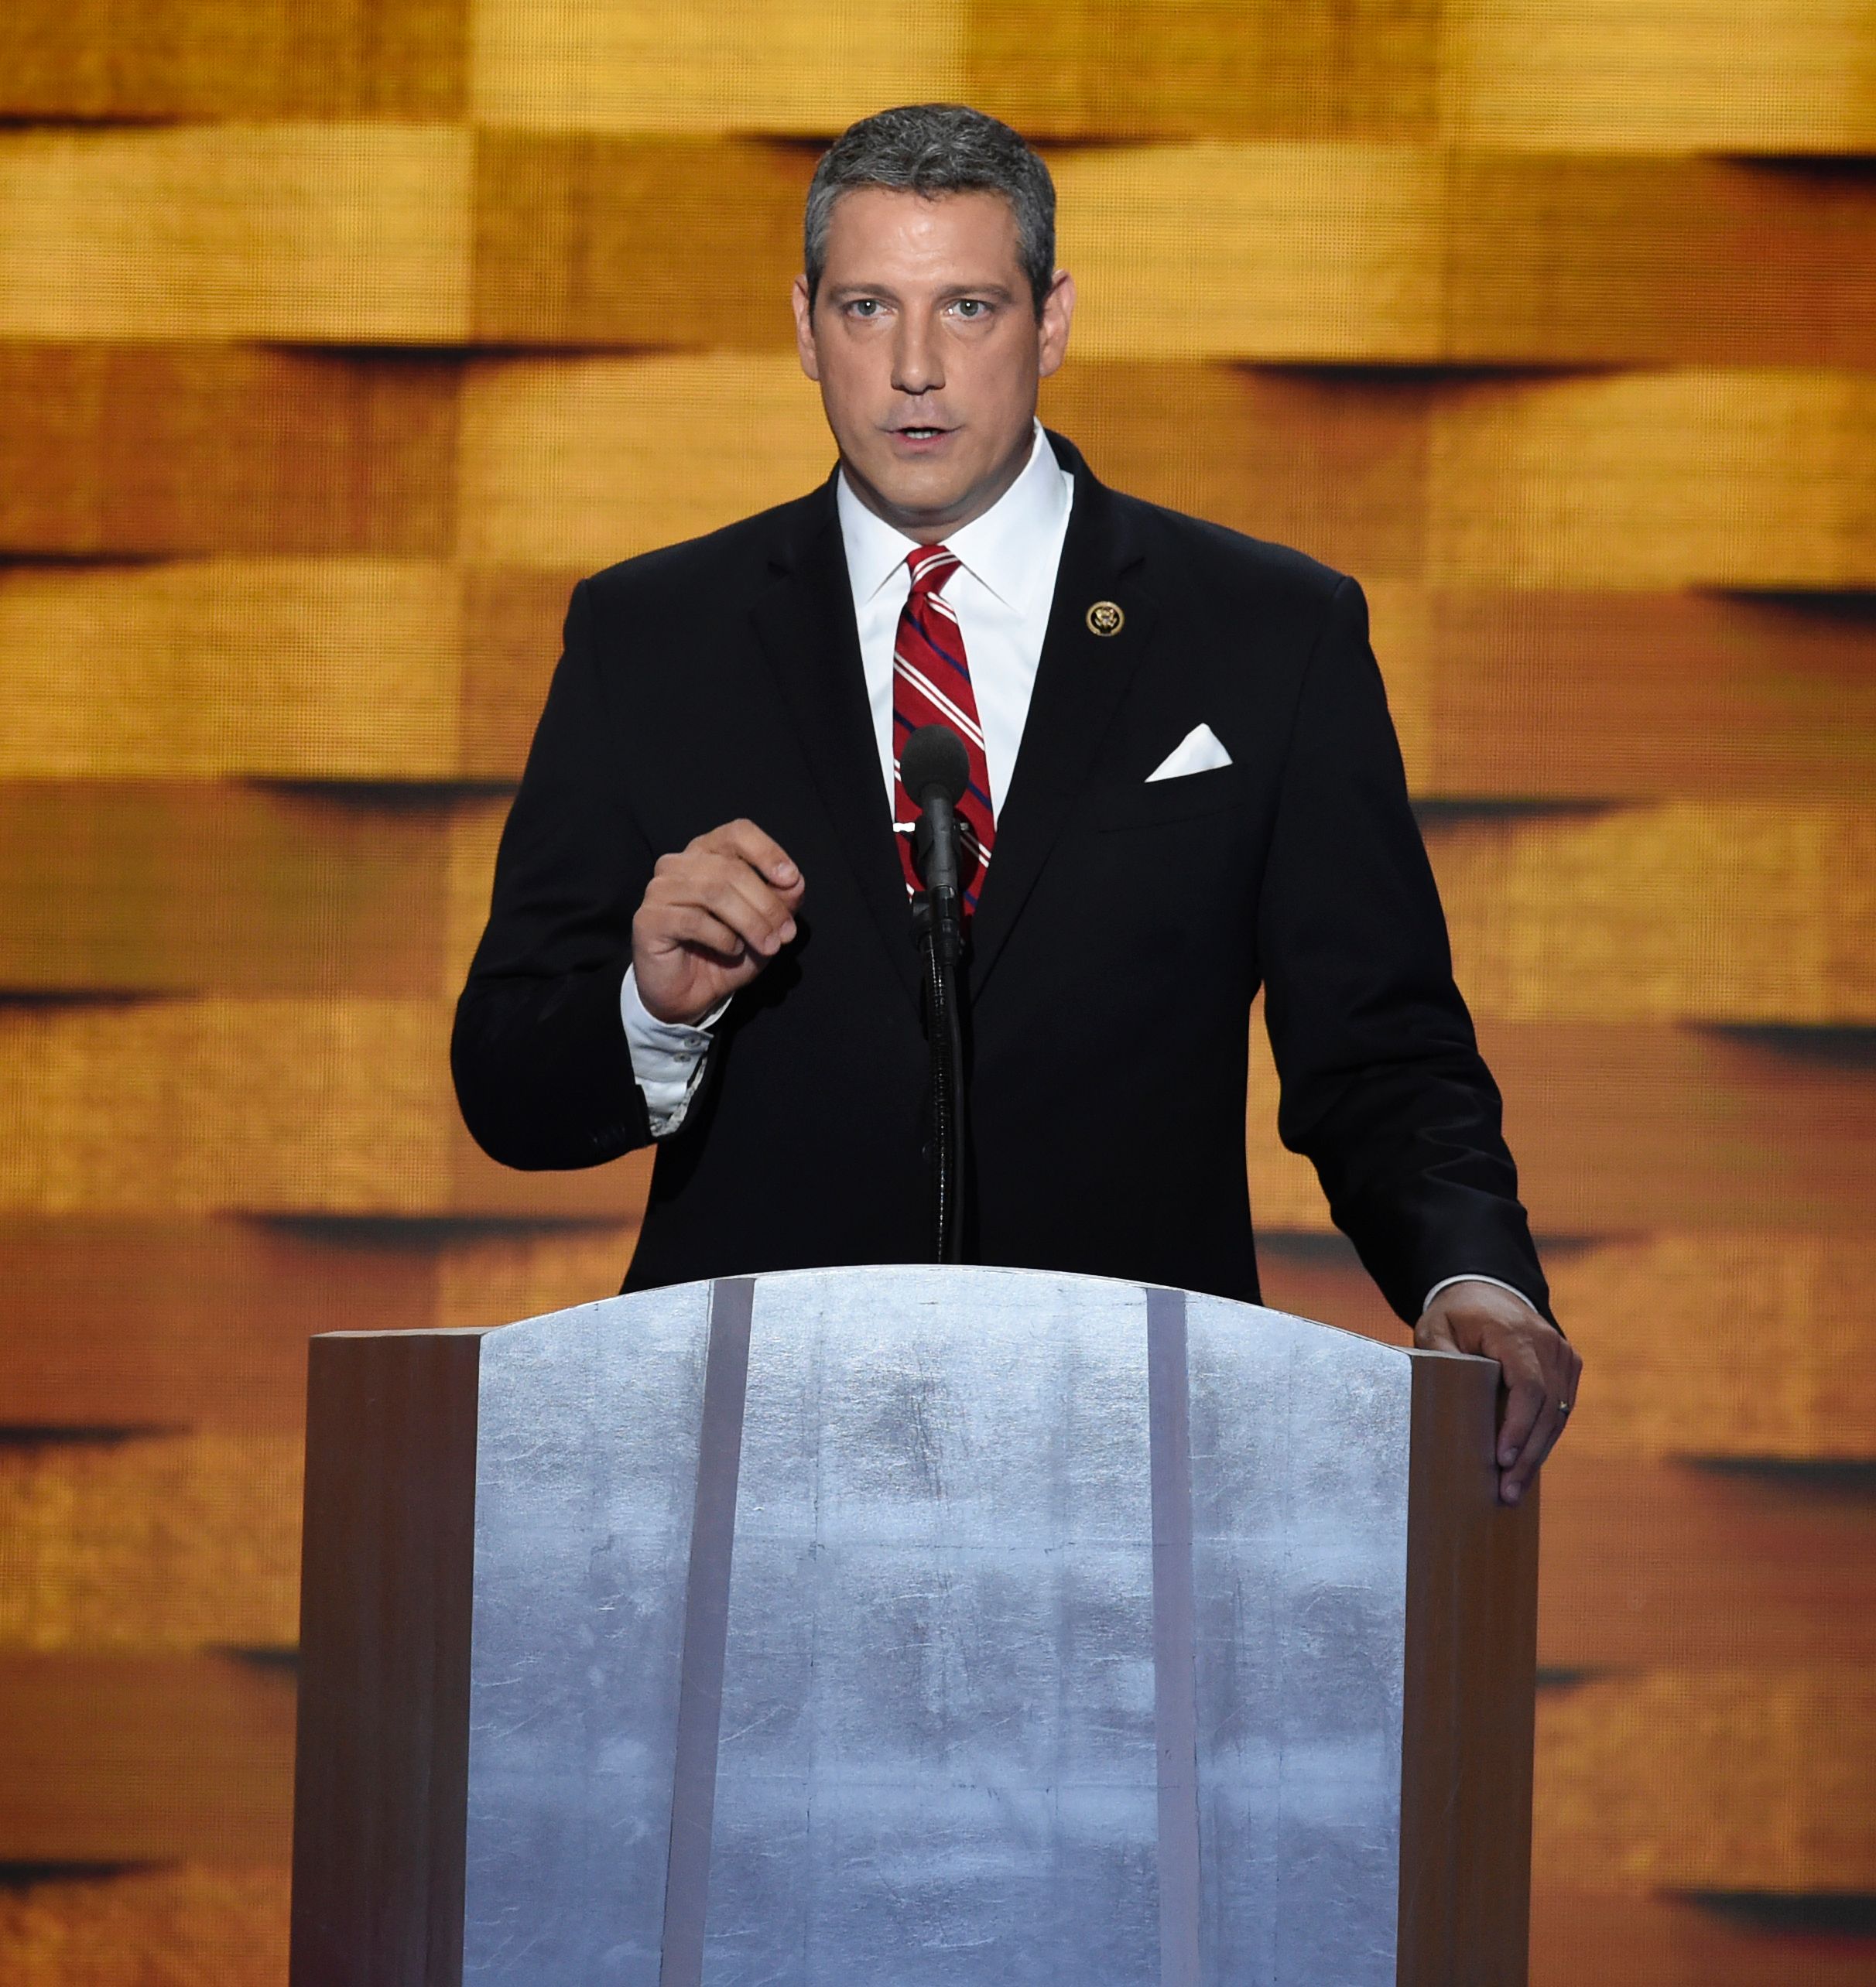 US Representative Tim Ryan of Ohio addresses delegates on fourth and final day of the Democratic National Convention at Wells Fargo Center on July 28, 2016 in Philadelphia, Pennsylvania. SAUL LOEB/AFP/Getty Images